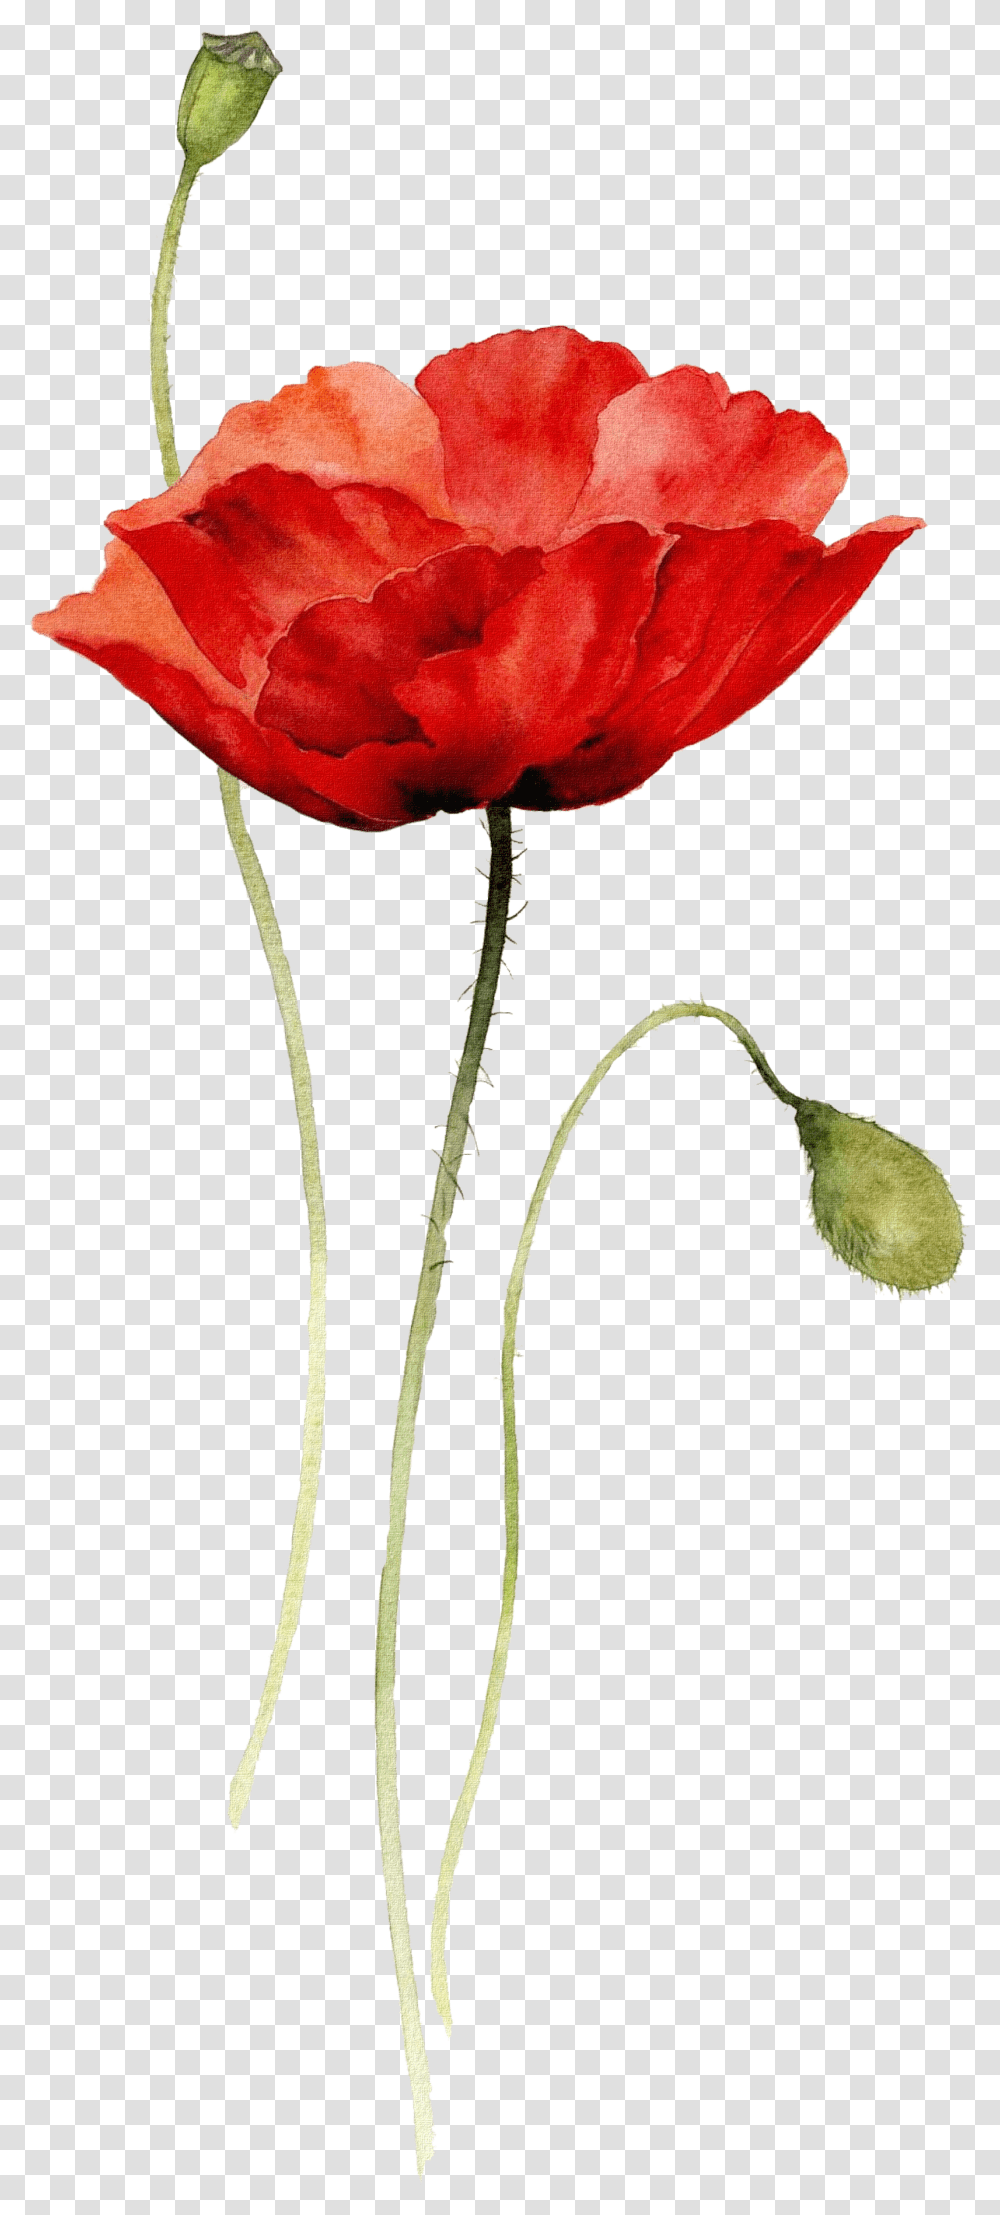 Download Poppies Watercolor Painting Paper Drawing Red Flower Watercolor Drawing, Plant, Blossom, Petal, Poppy Transparent Png